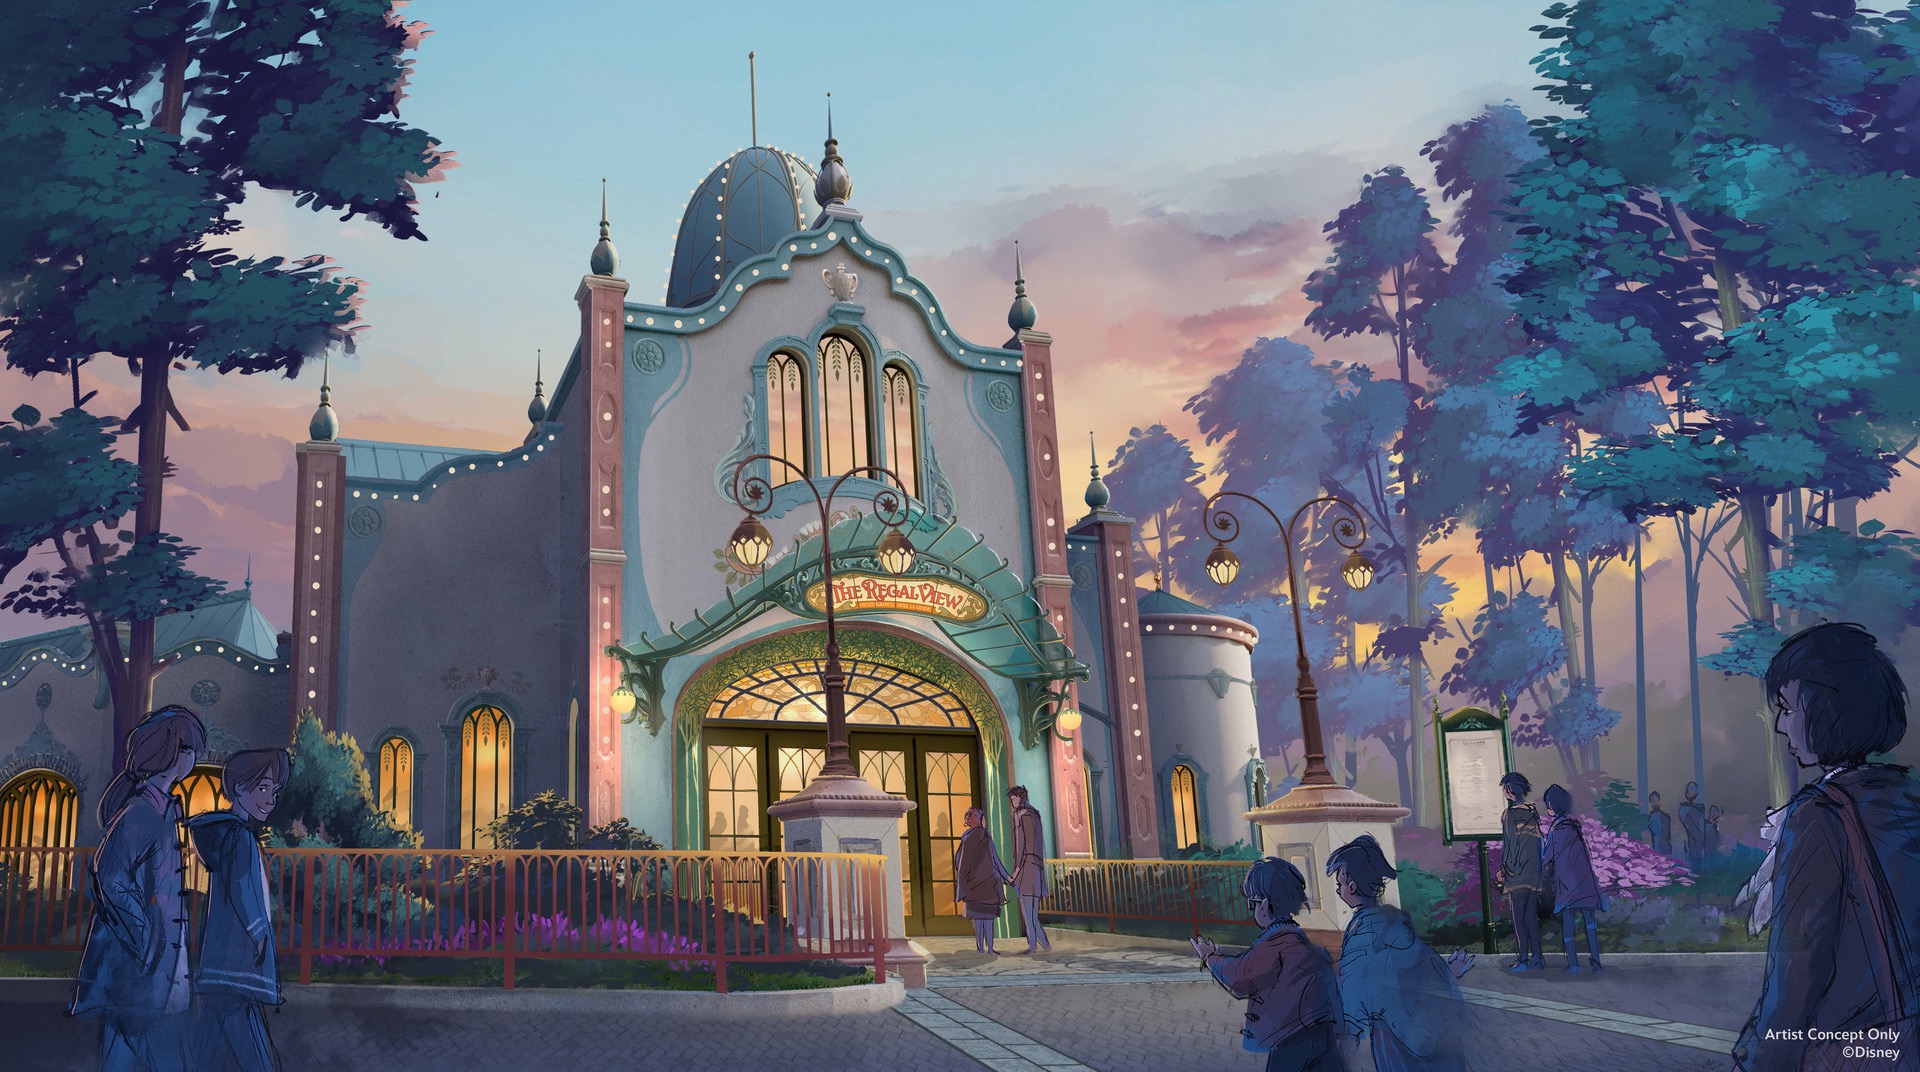 Disneyland Paris Confirm details for Adventure Way, including new Princess Dining and Rapunzel Attraction!